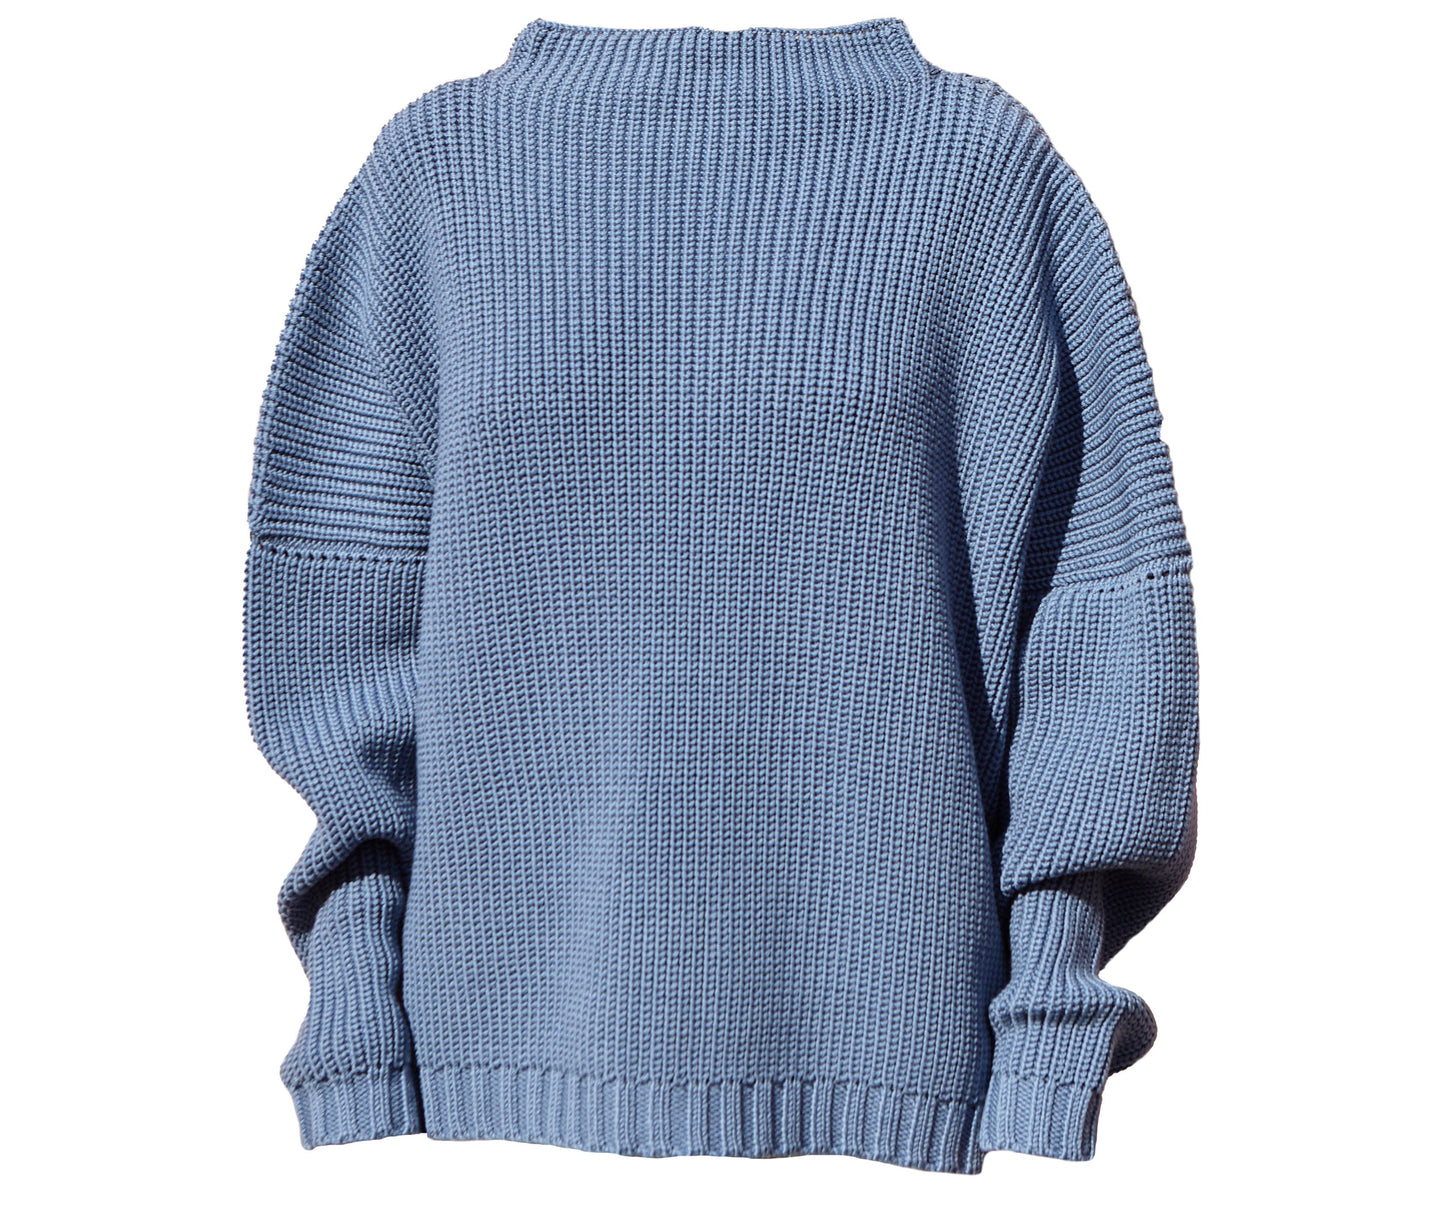 Laumes Sweater - Baltic Blue